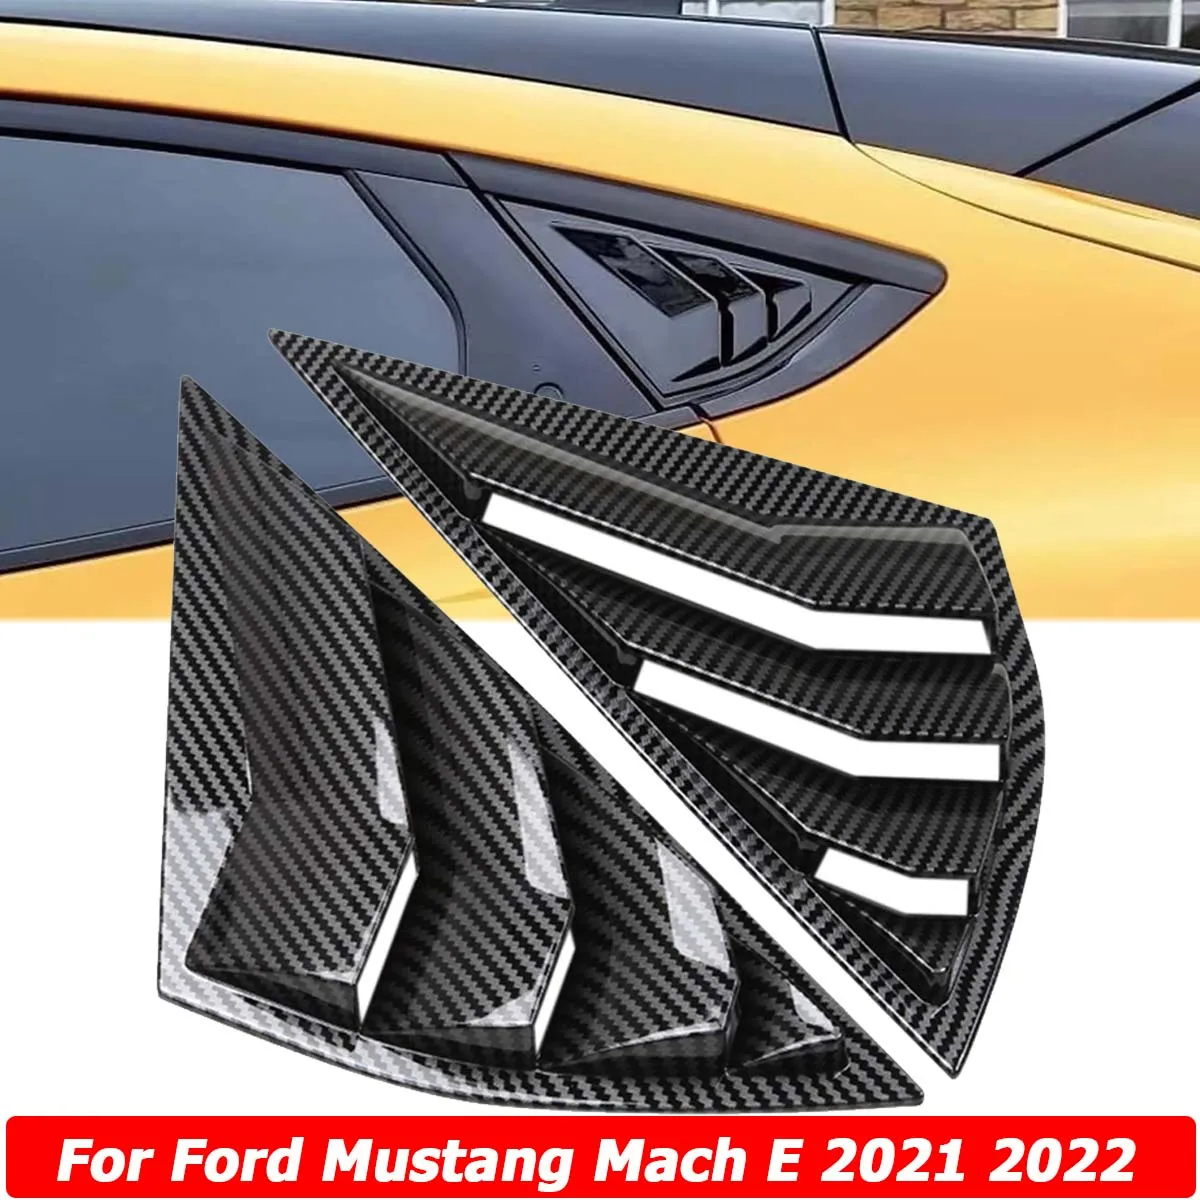 

For Ford Mustang Mach E 2021 2022 Rear Window Quarter Side Vent Scoop Louver Cover Trim Sun Shade Windshield Car Accssories